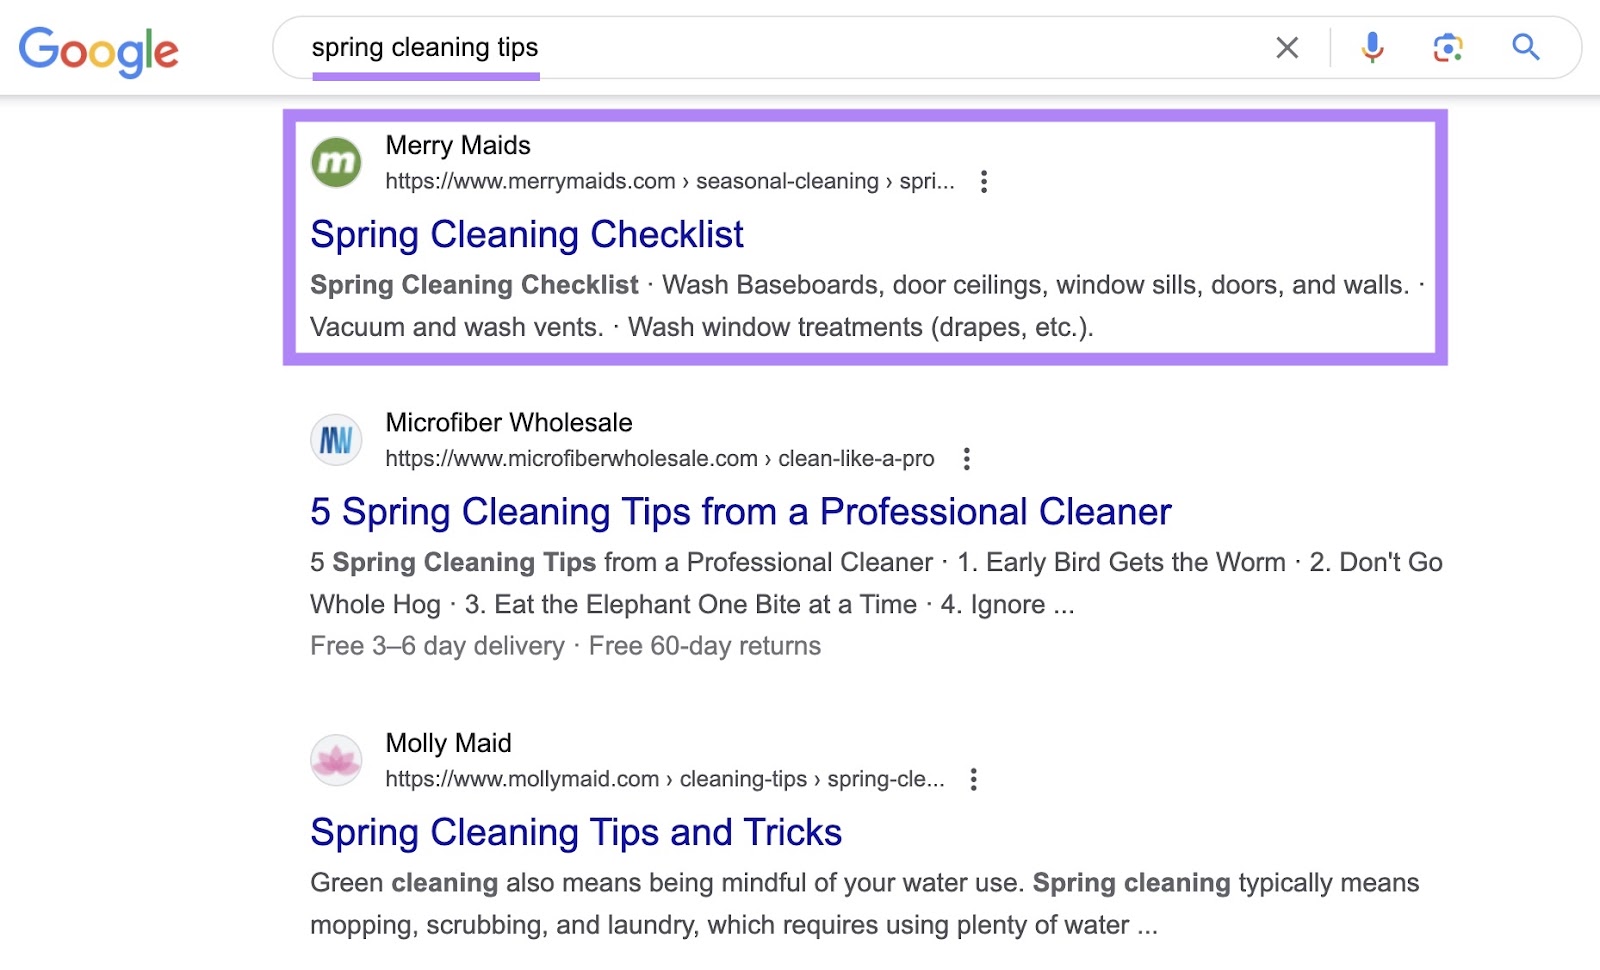 Google SERP for the term “spring cleaning tips” with a blog article on the Merry Maids website highlighted.